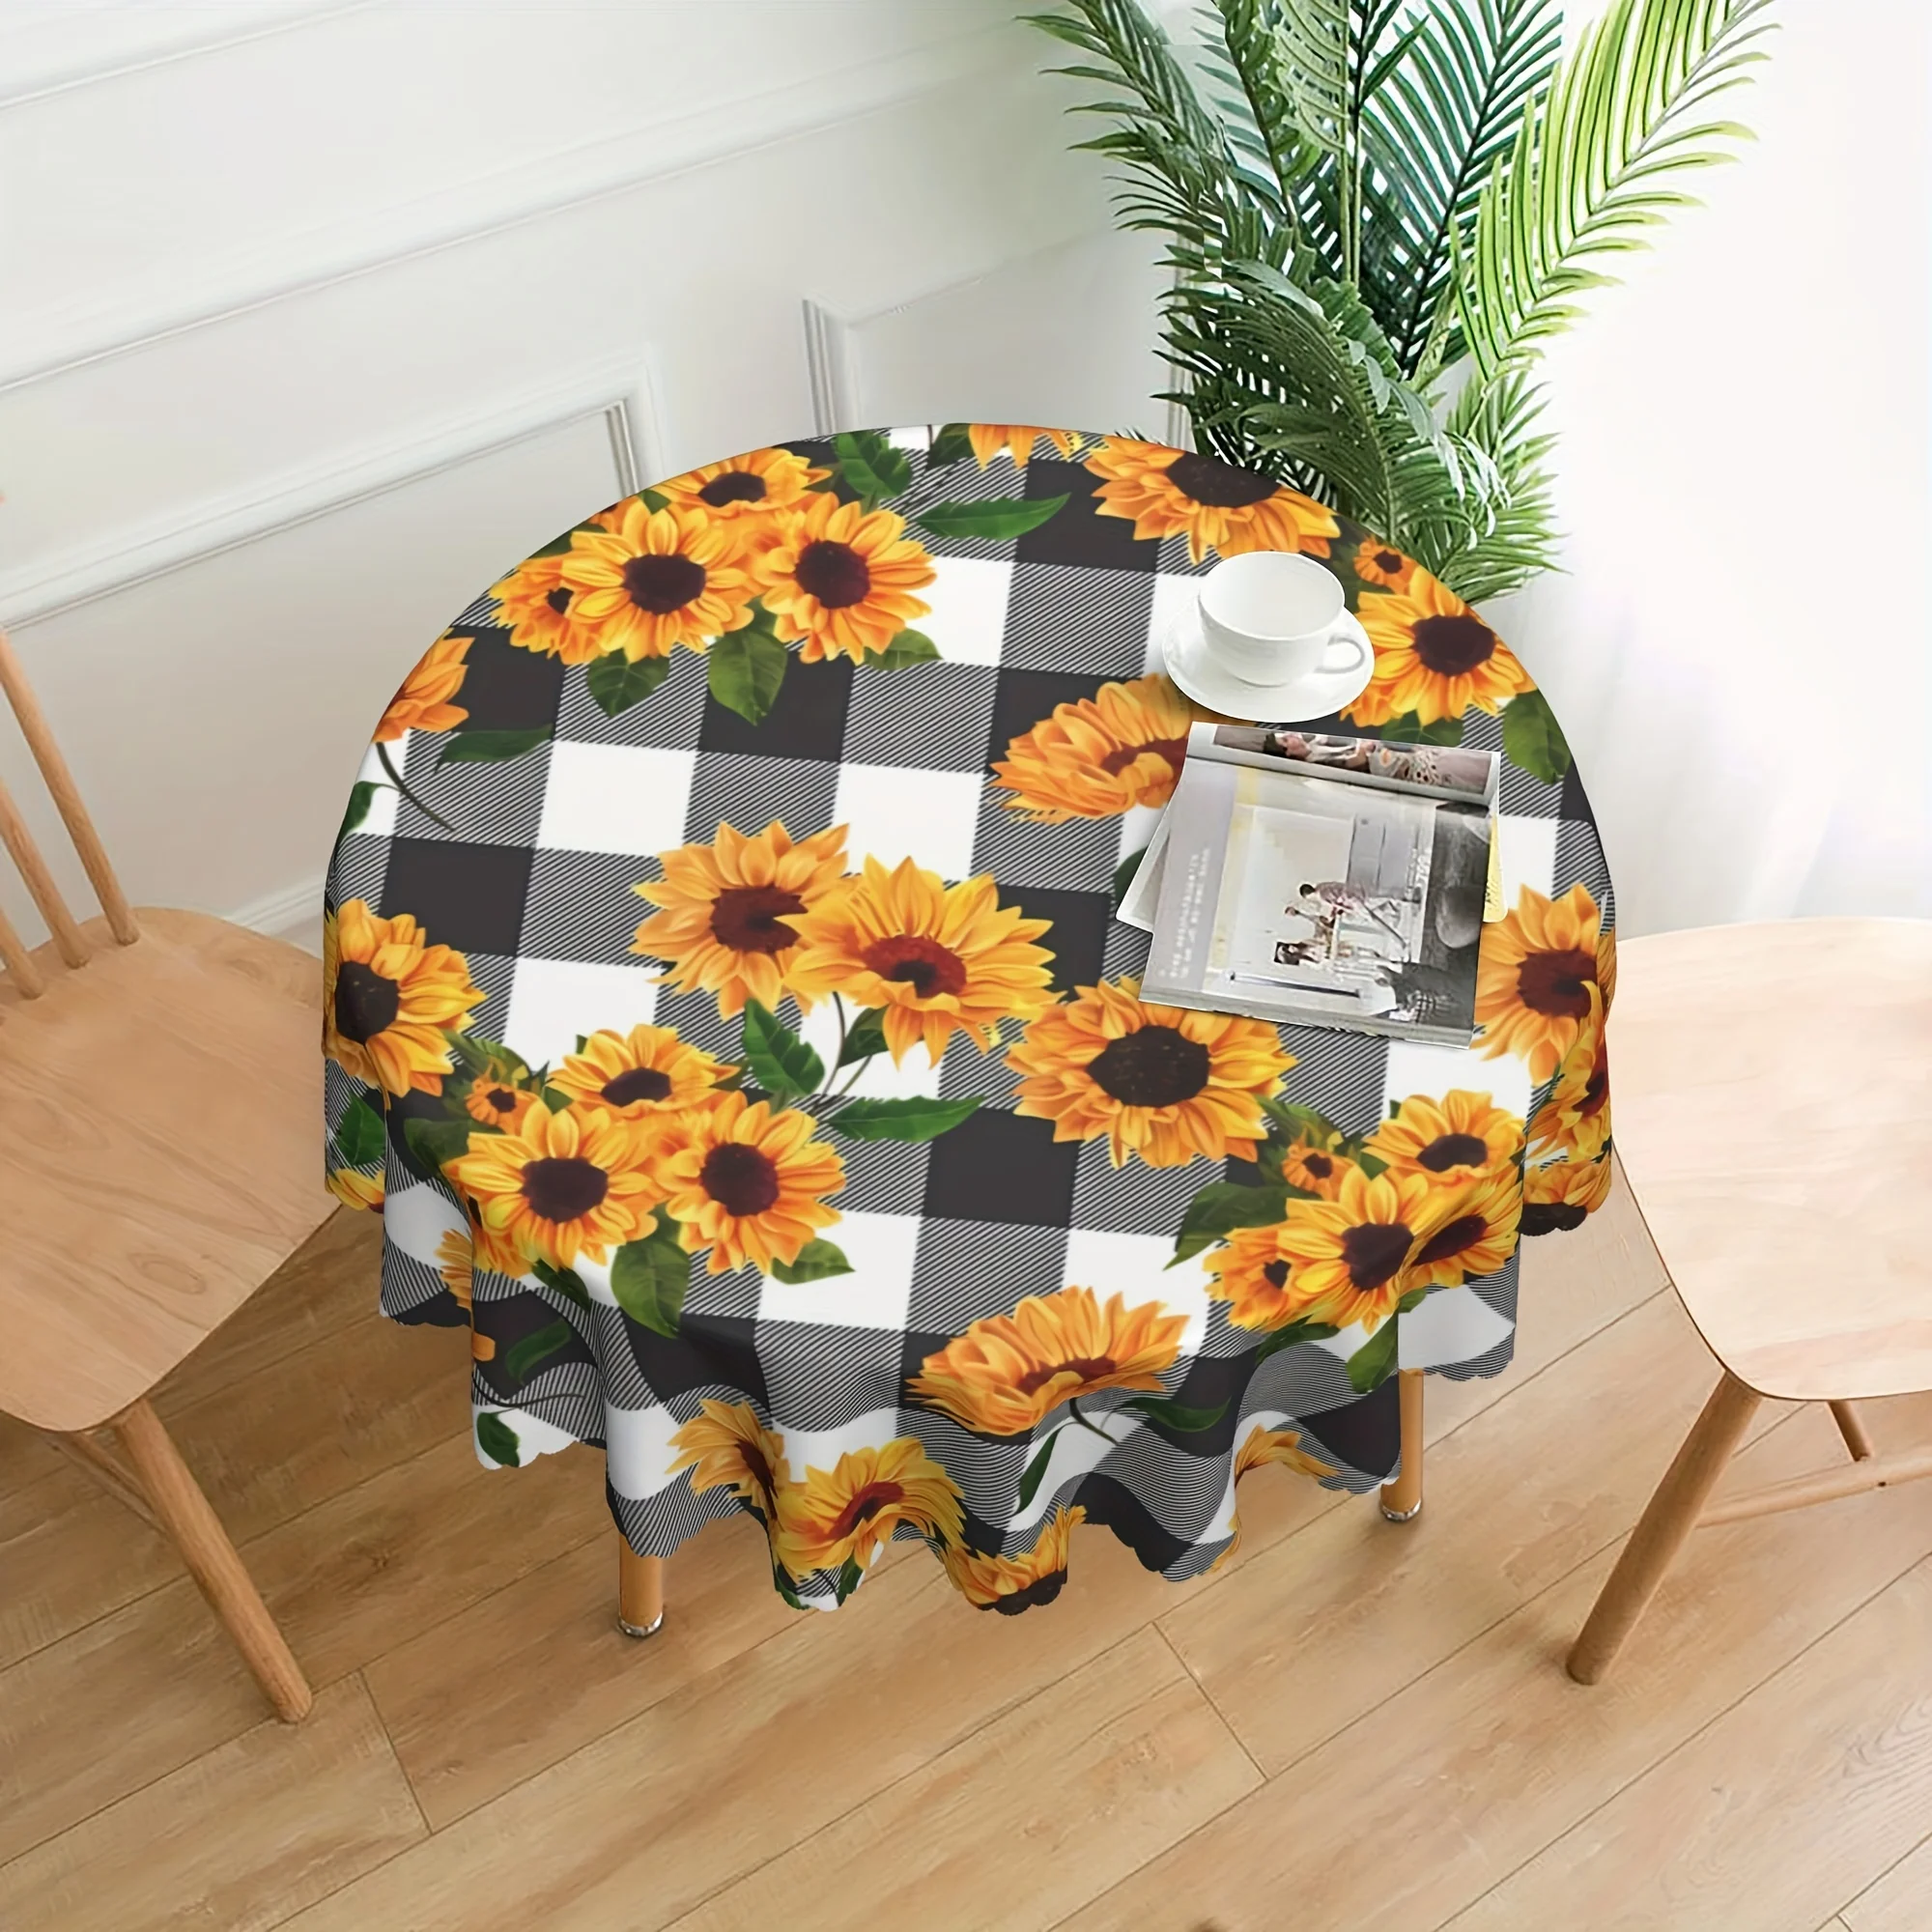 Sunflower Print Decoration Living Room Kitchen Dustproof Round Tablecloth Holiday Outdoor Party Dinner Decoration Accessories